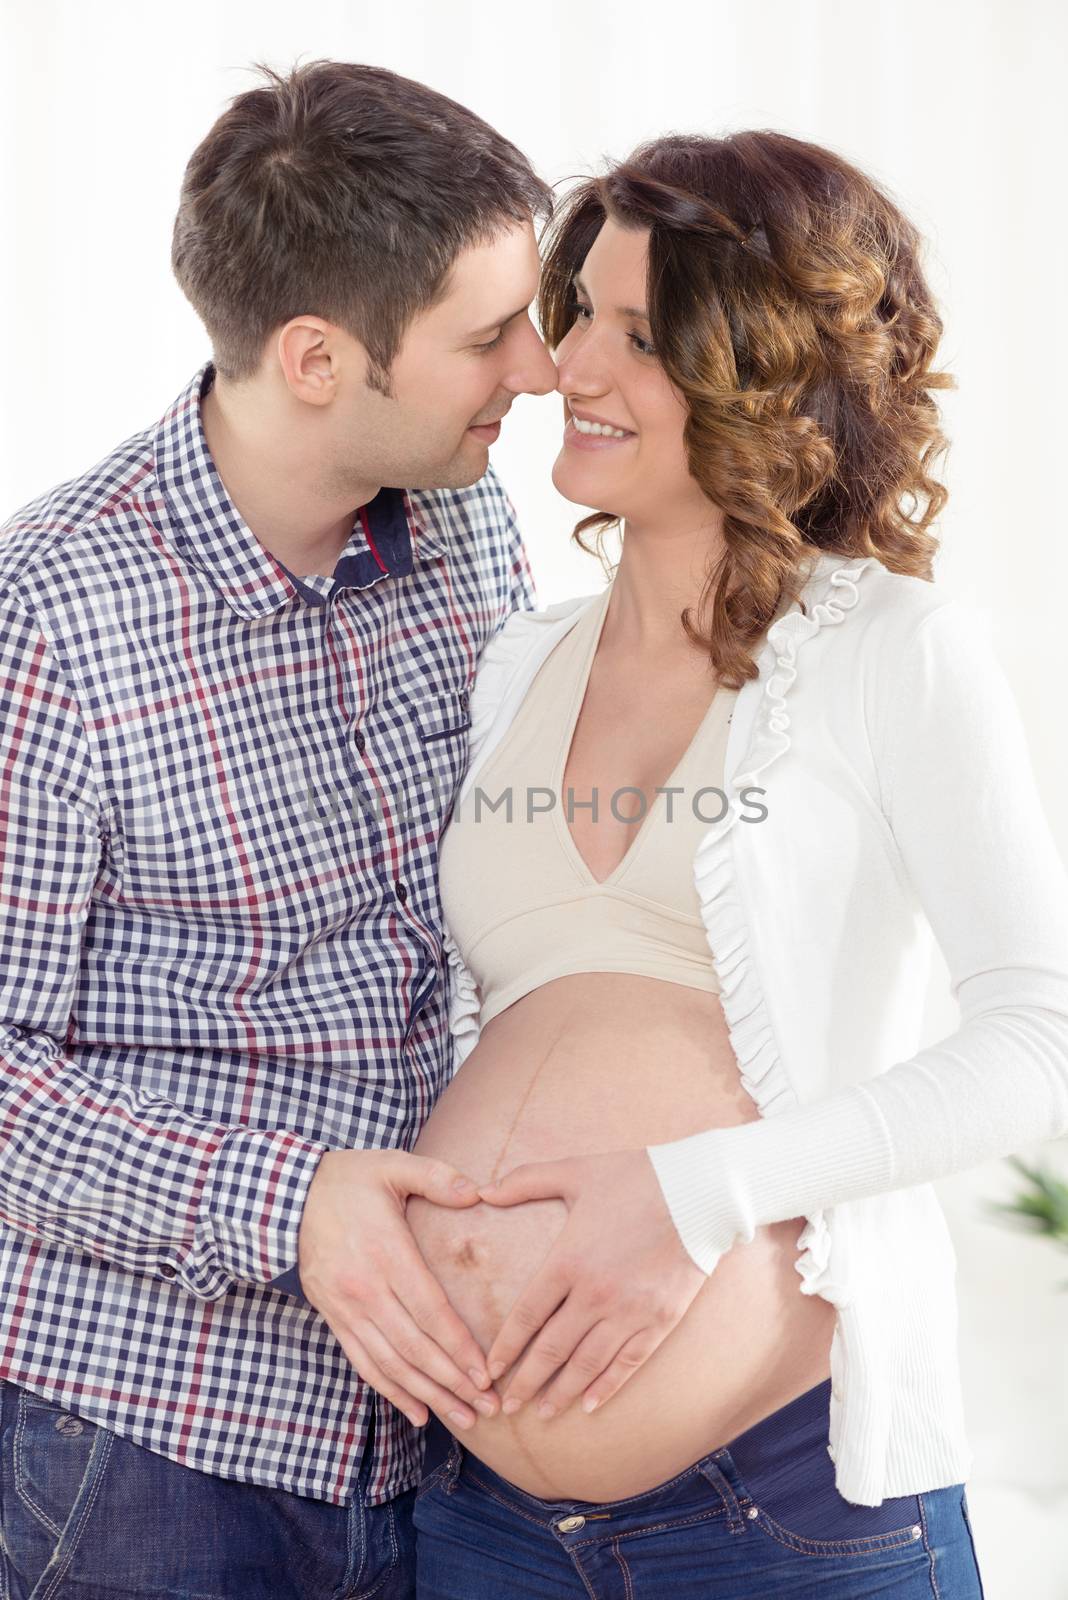 Portrait of a beautiful young couple making a heart shape on the woman's pregnant belly.